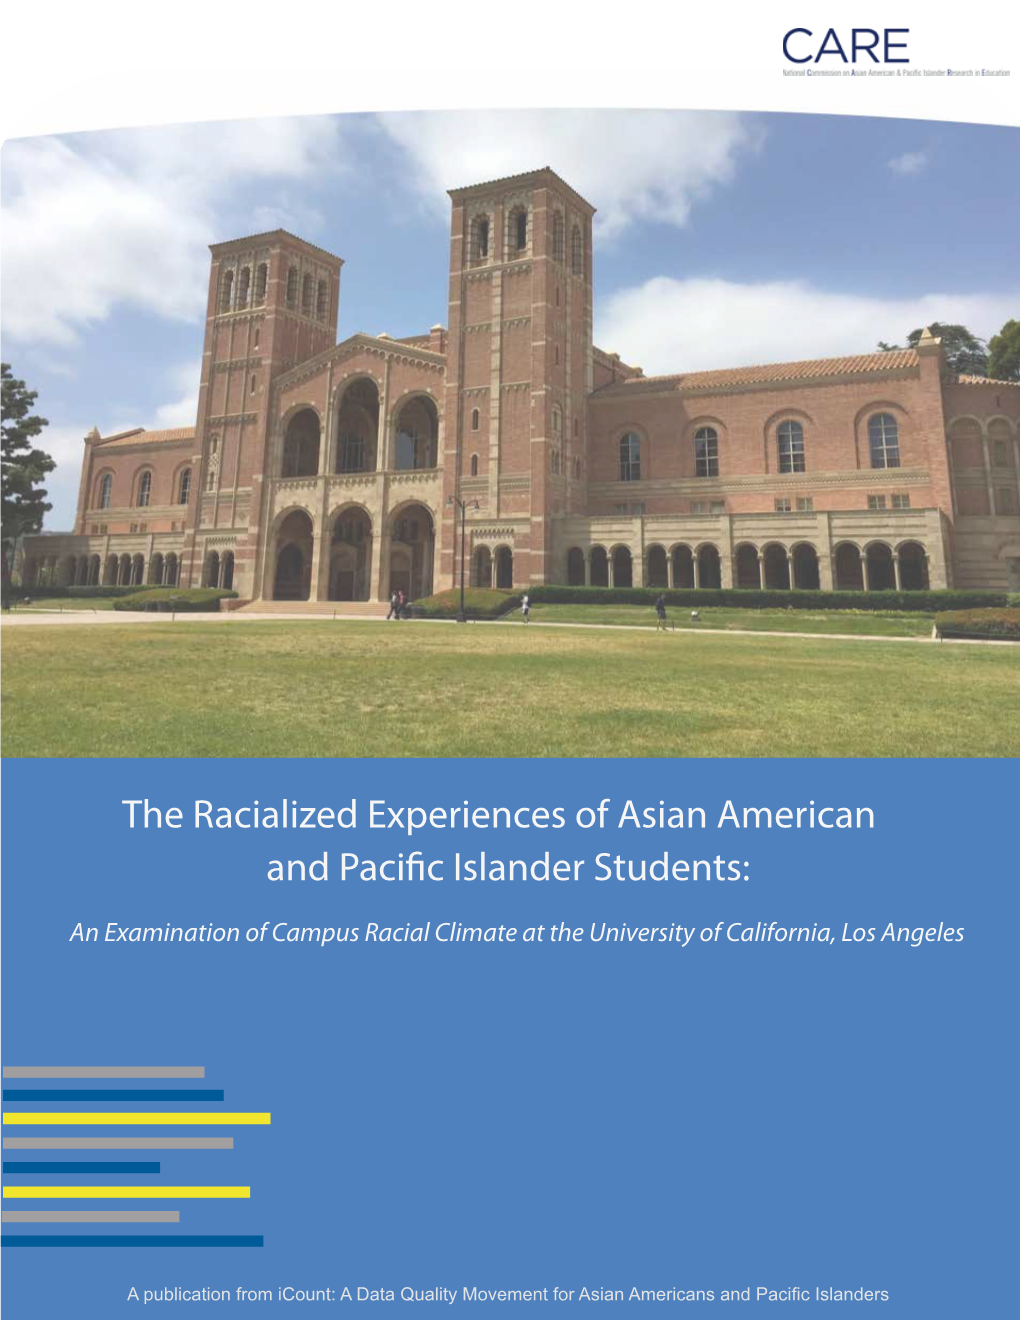 The Racialized Experiences of Asian and Pacific Islander Students